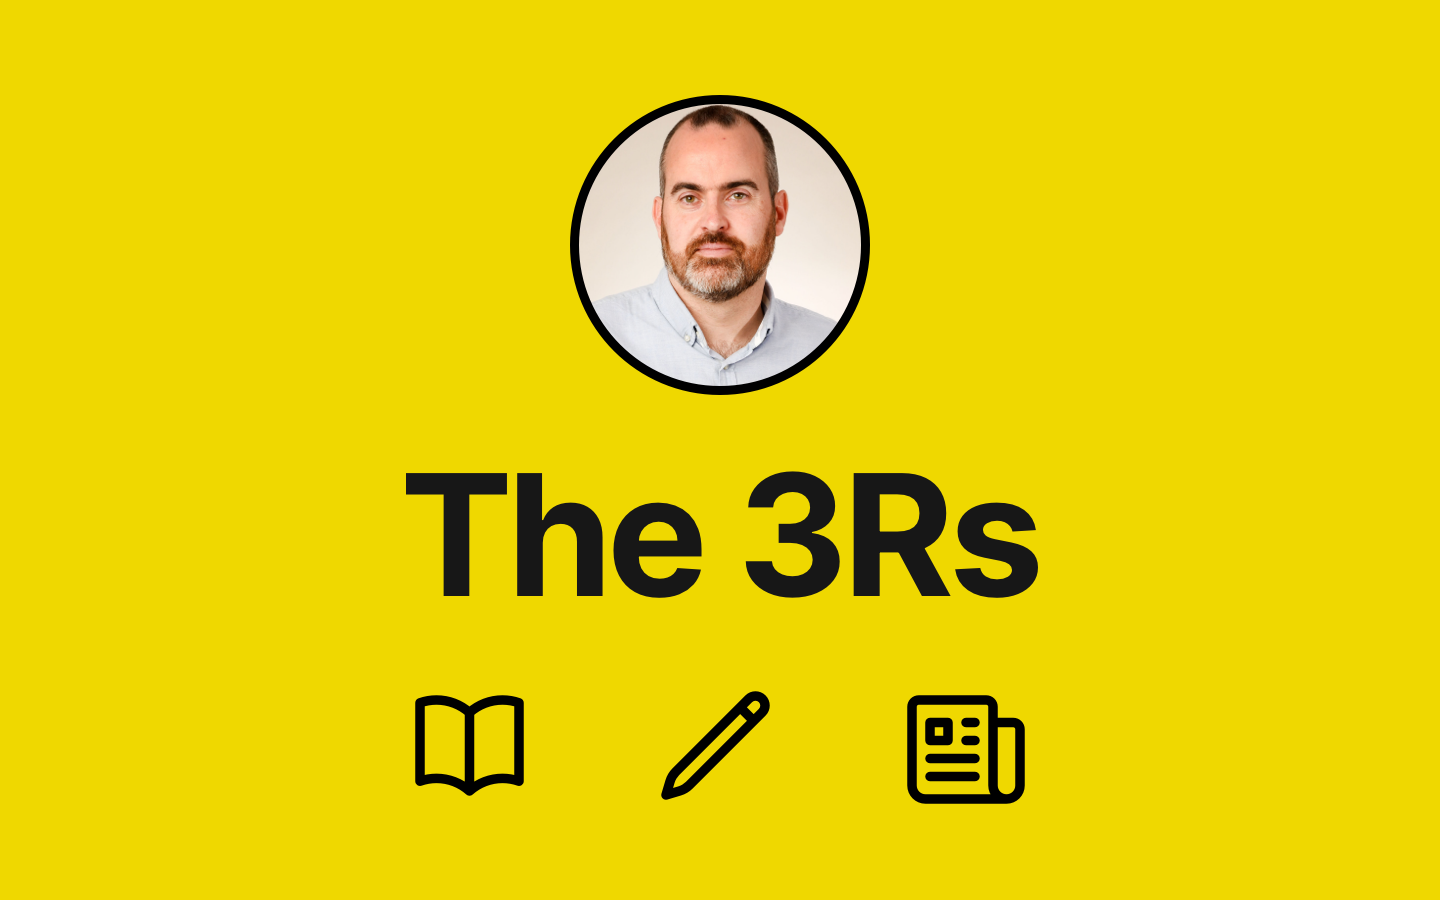 The 3Rs - Reading, w®iting, and research to be interested in #17 feature image